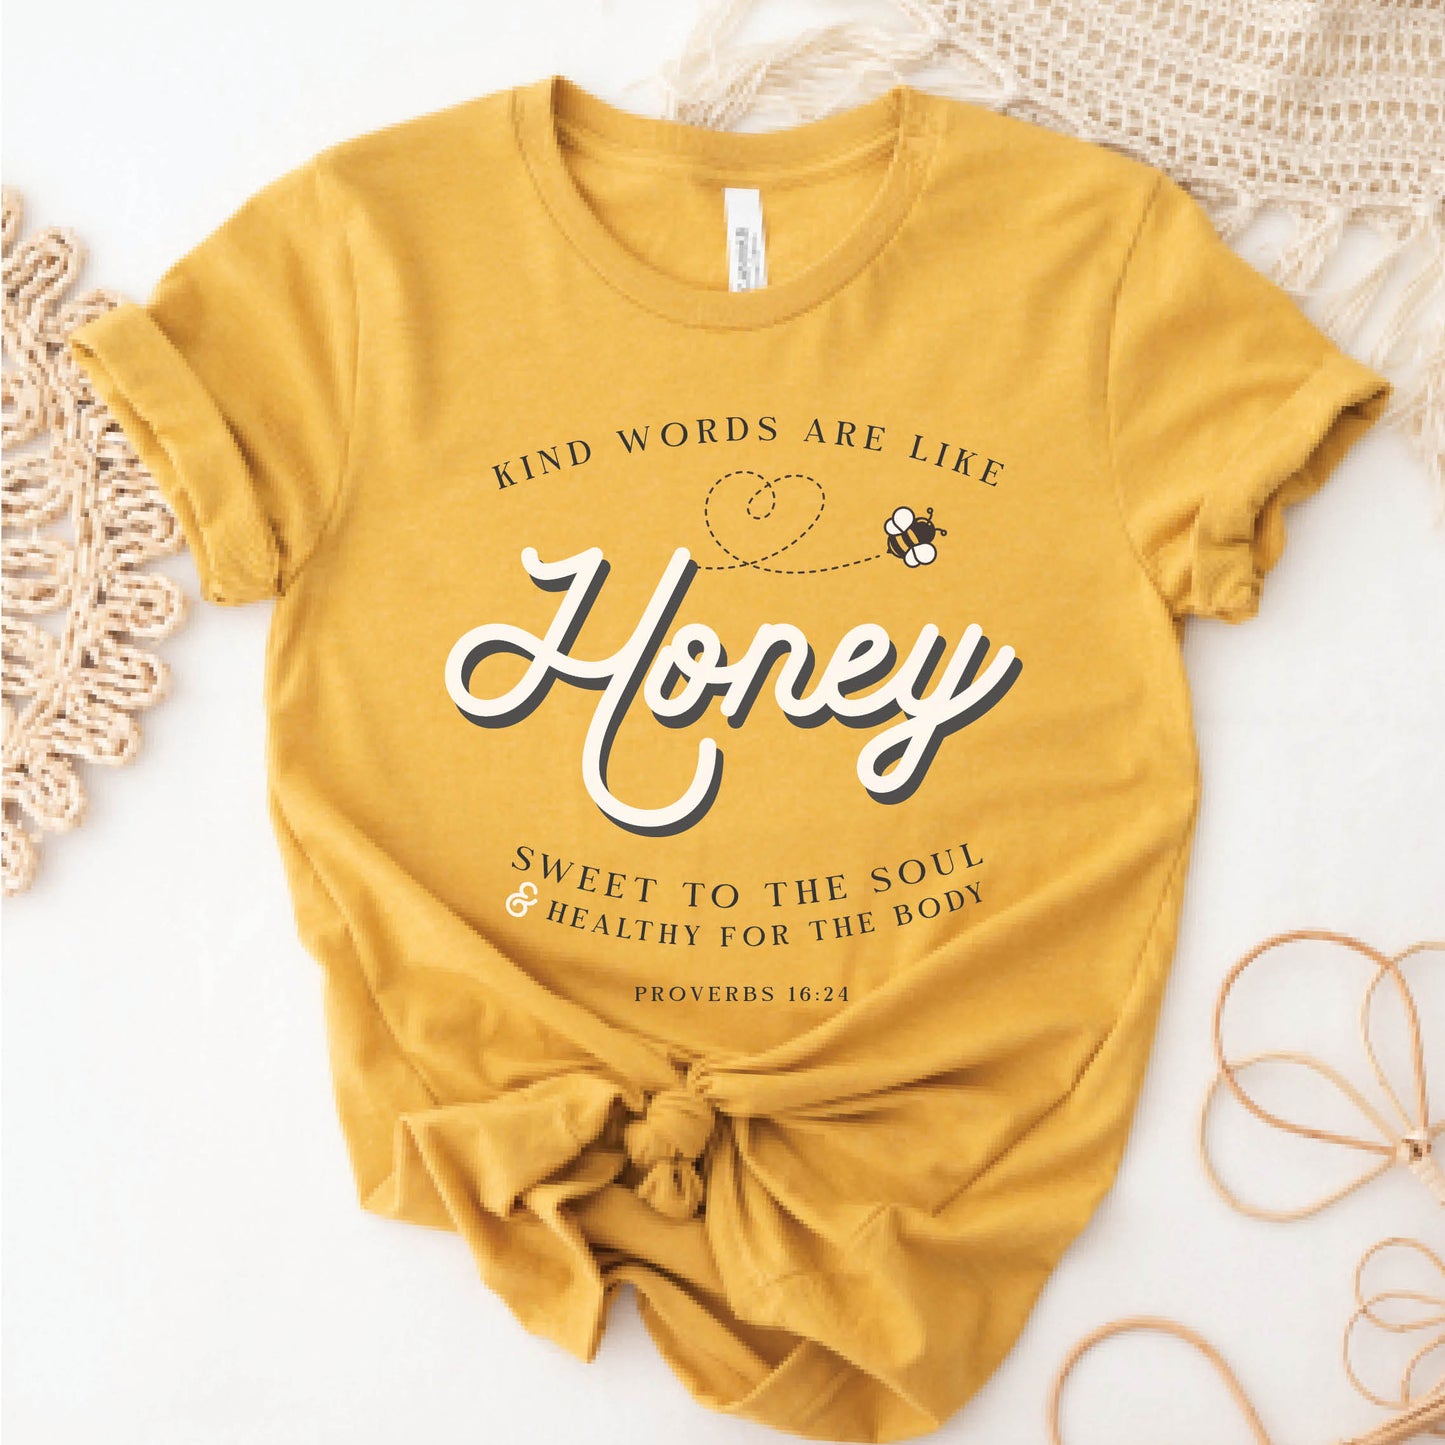 Mustard gold yellow Christian aesthetic unisex faith-based kindness t-shirt for women with Proverbs 16:24 bible verse quote that says, "Kind Words Are Like Honey, Sweet To the Soul, and Healthy For the Body" 